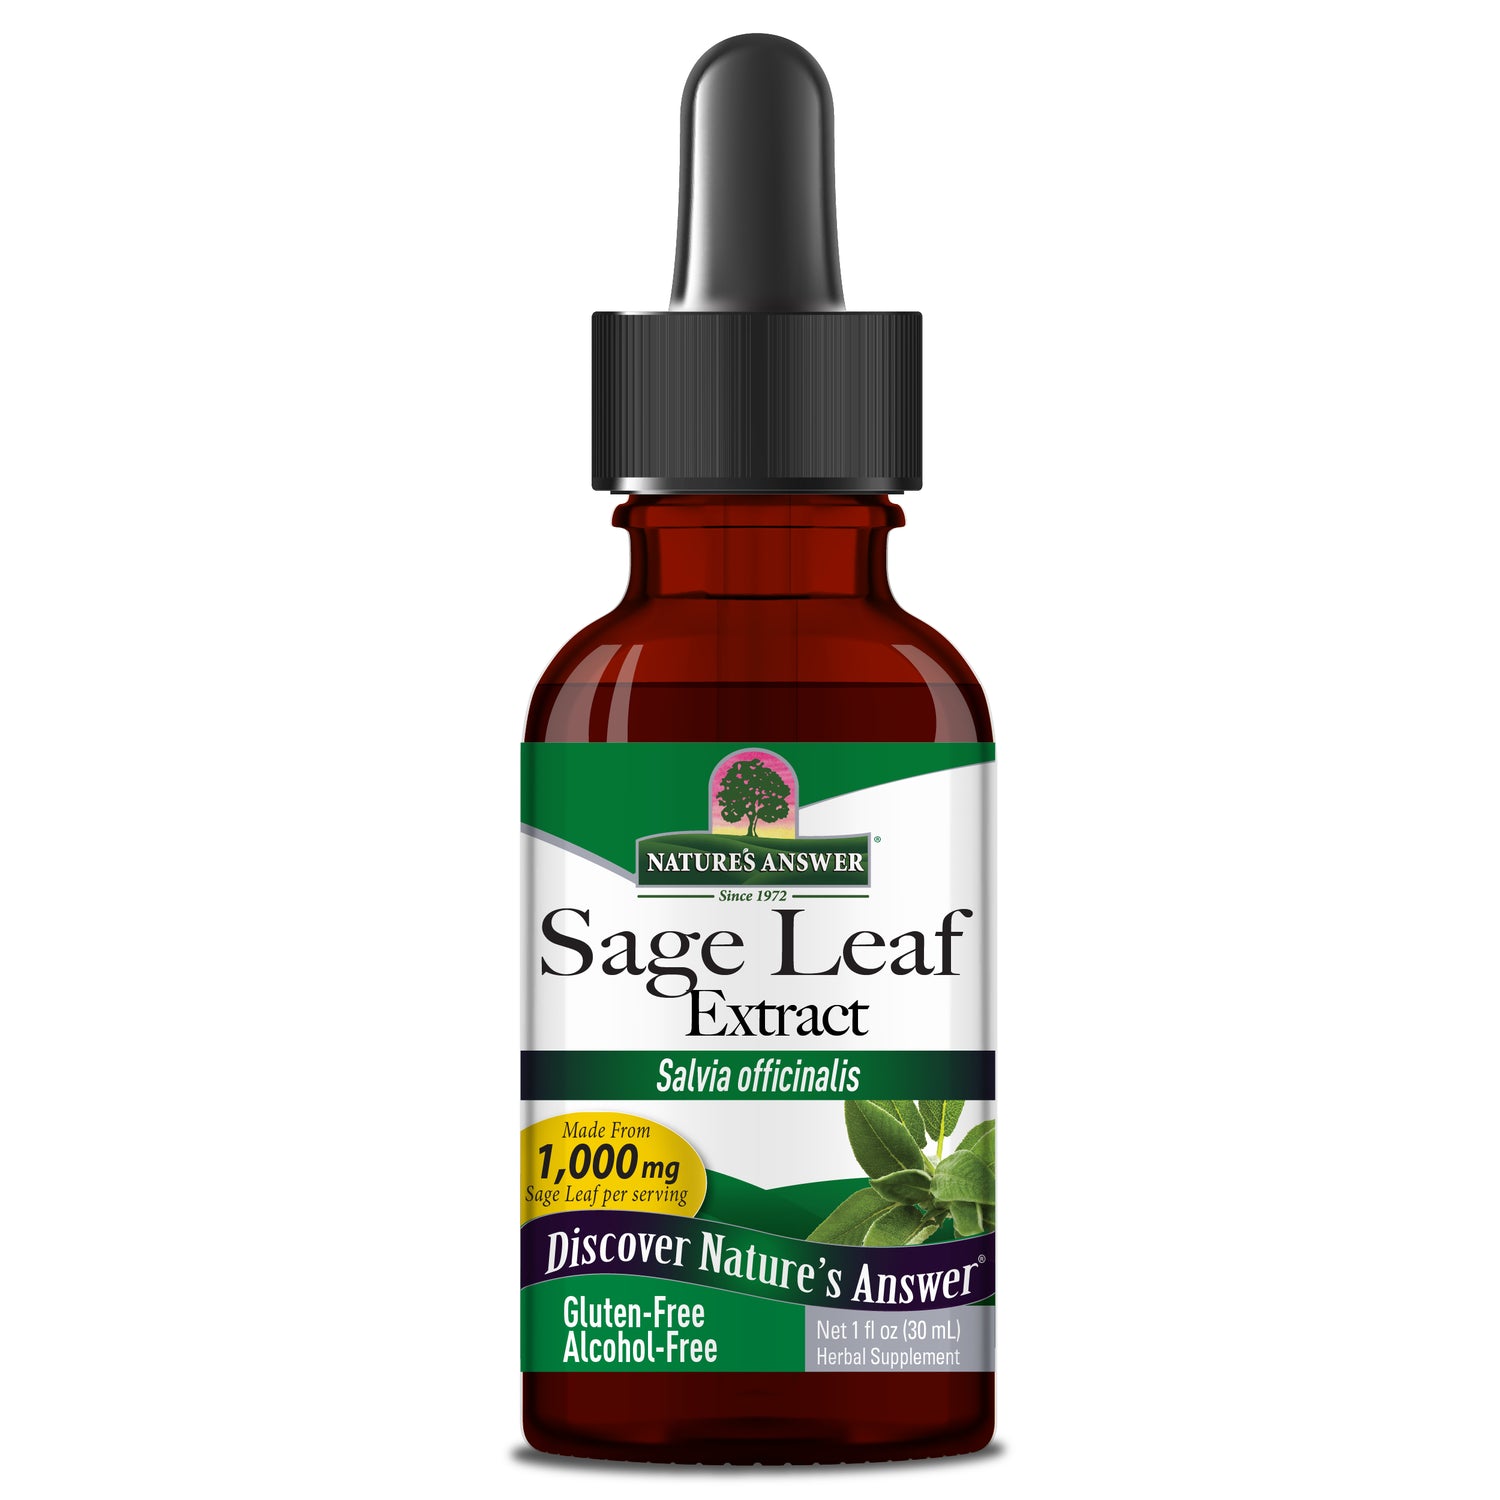 Nature's Answer Sage Leaf Extract 1000mg Supports Digestive & Immune Health 30 ml